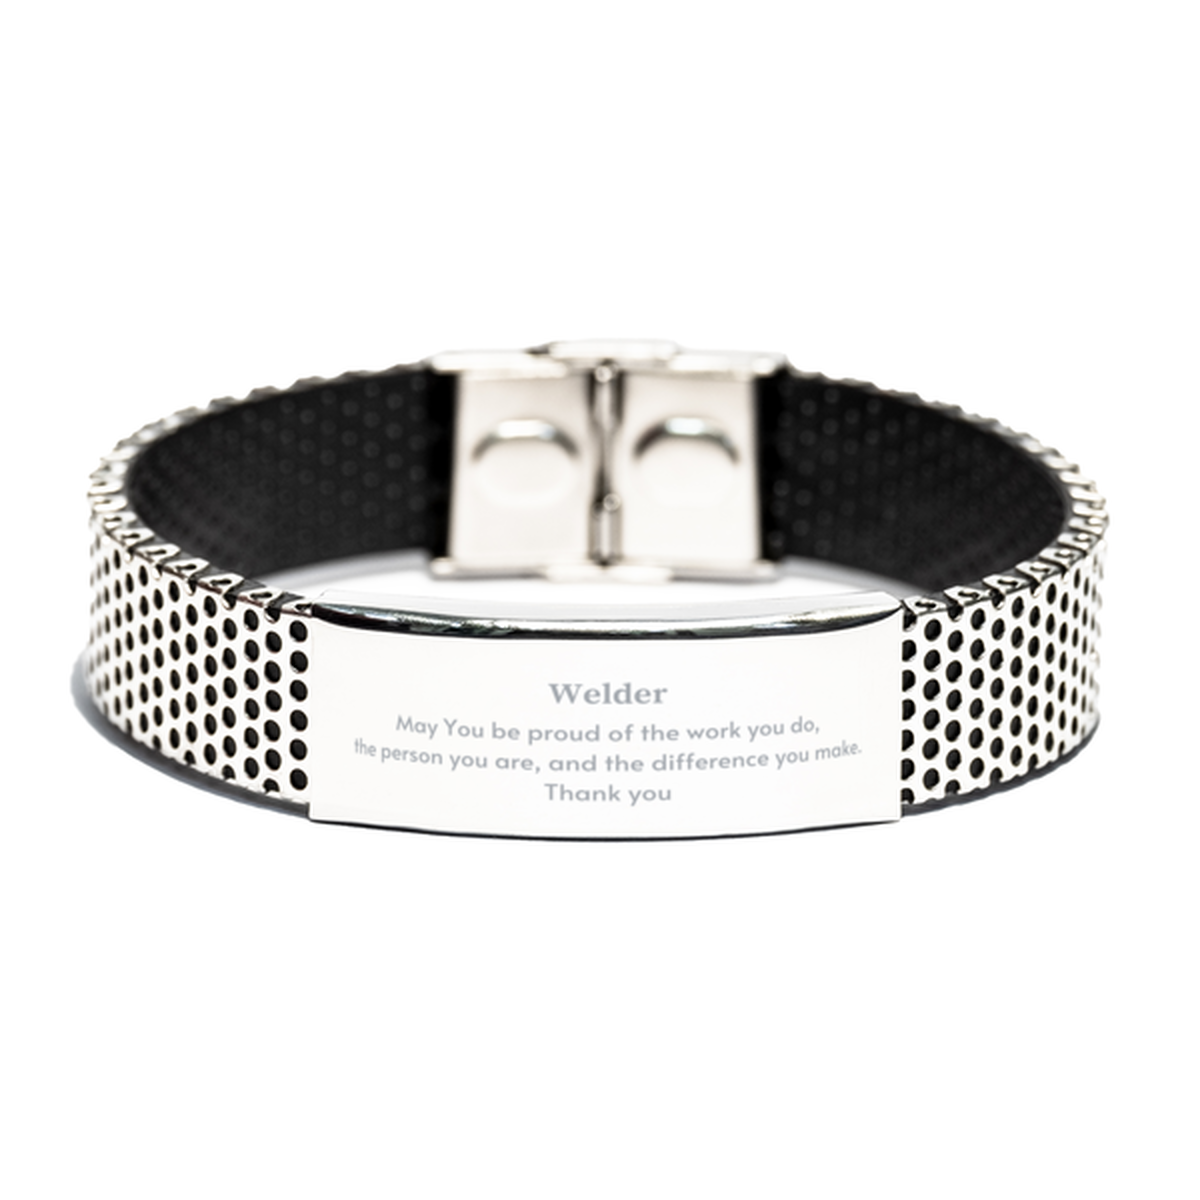 Heartwarming Stainless Steel Bracelet Retirement Coworkers Gifts for Welder, Welder May You be proud of the work you do, the person you are Gifts for Boss Men Women Friends